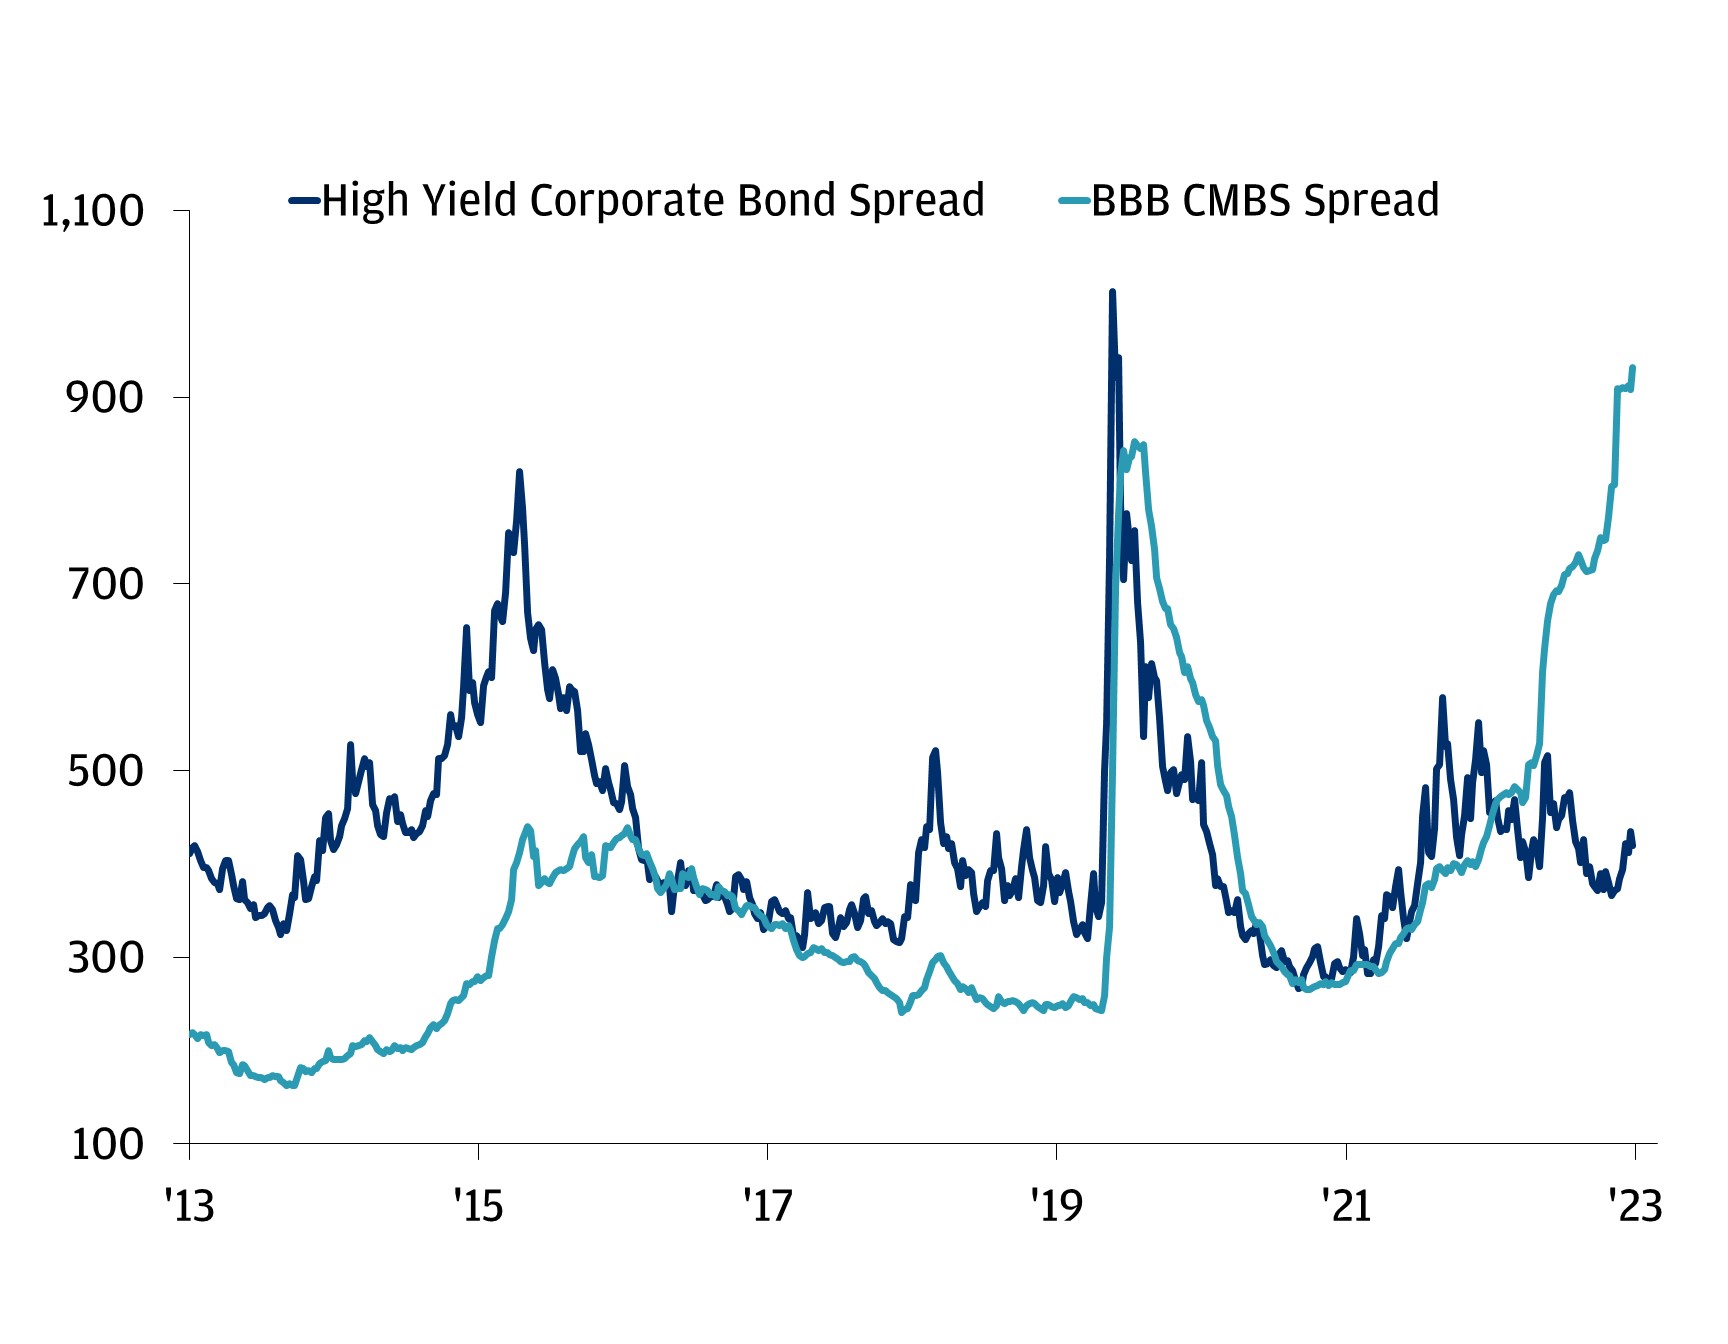 Comparative chart of high yield corporate bond spreads in basis points (bps).